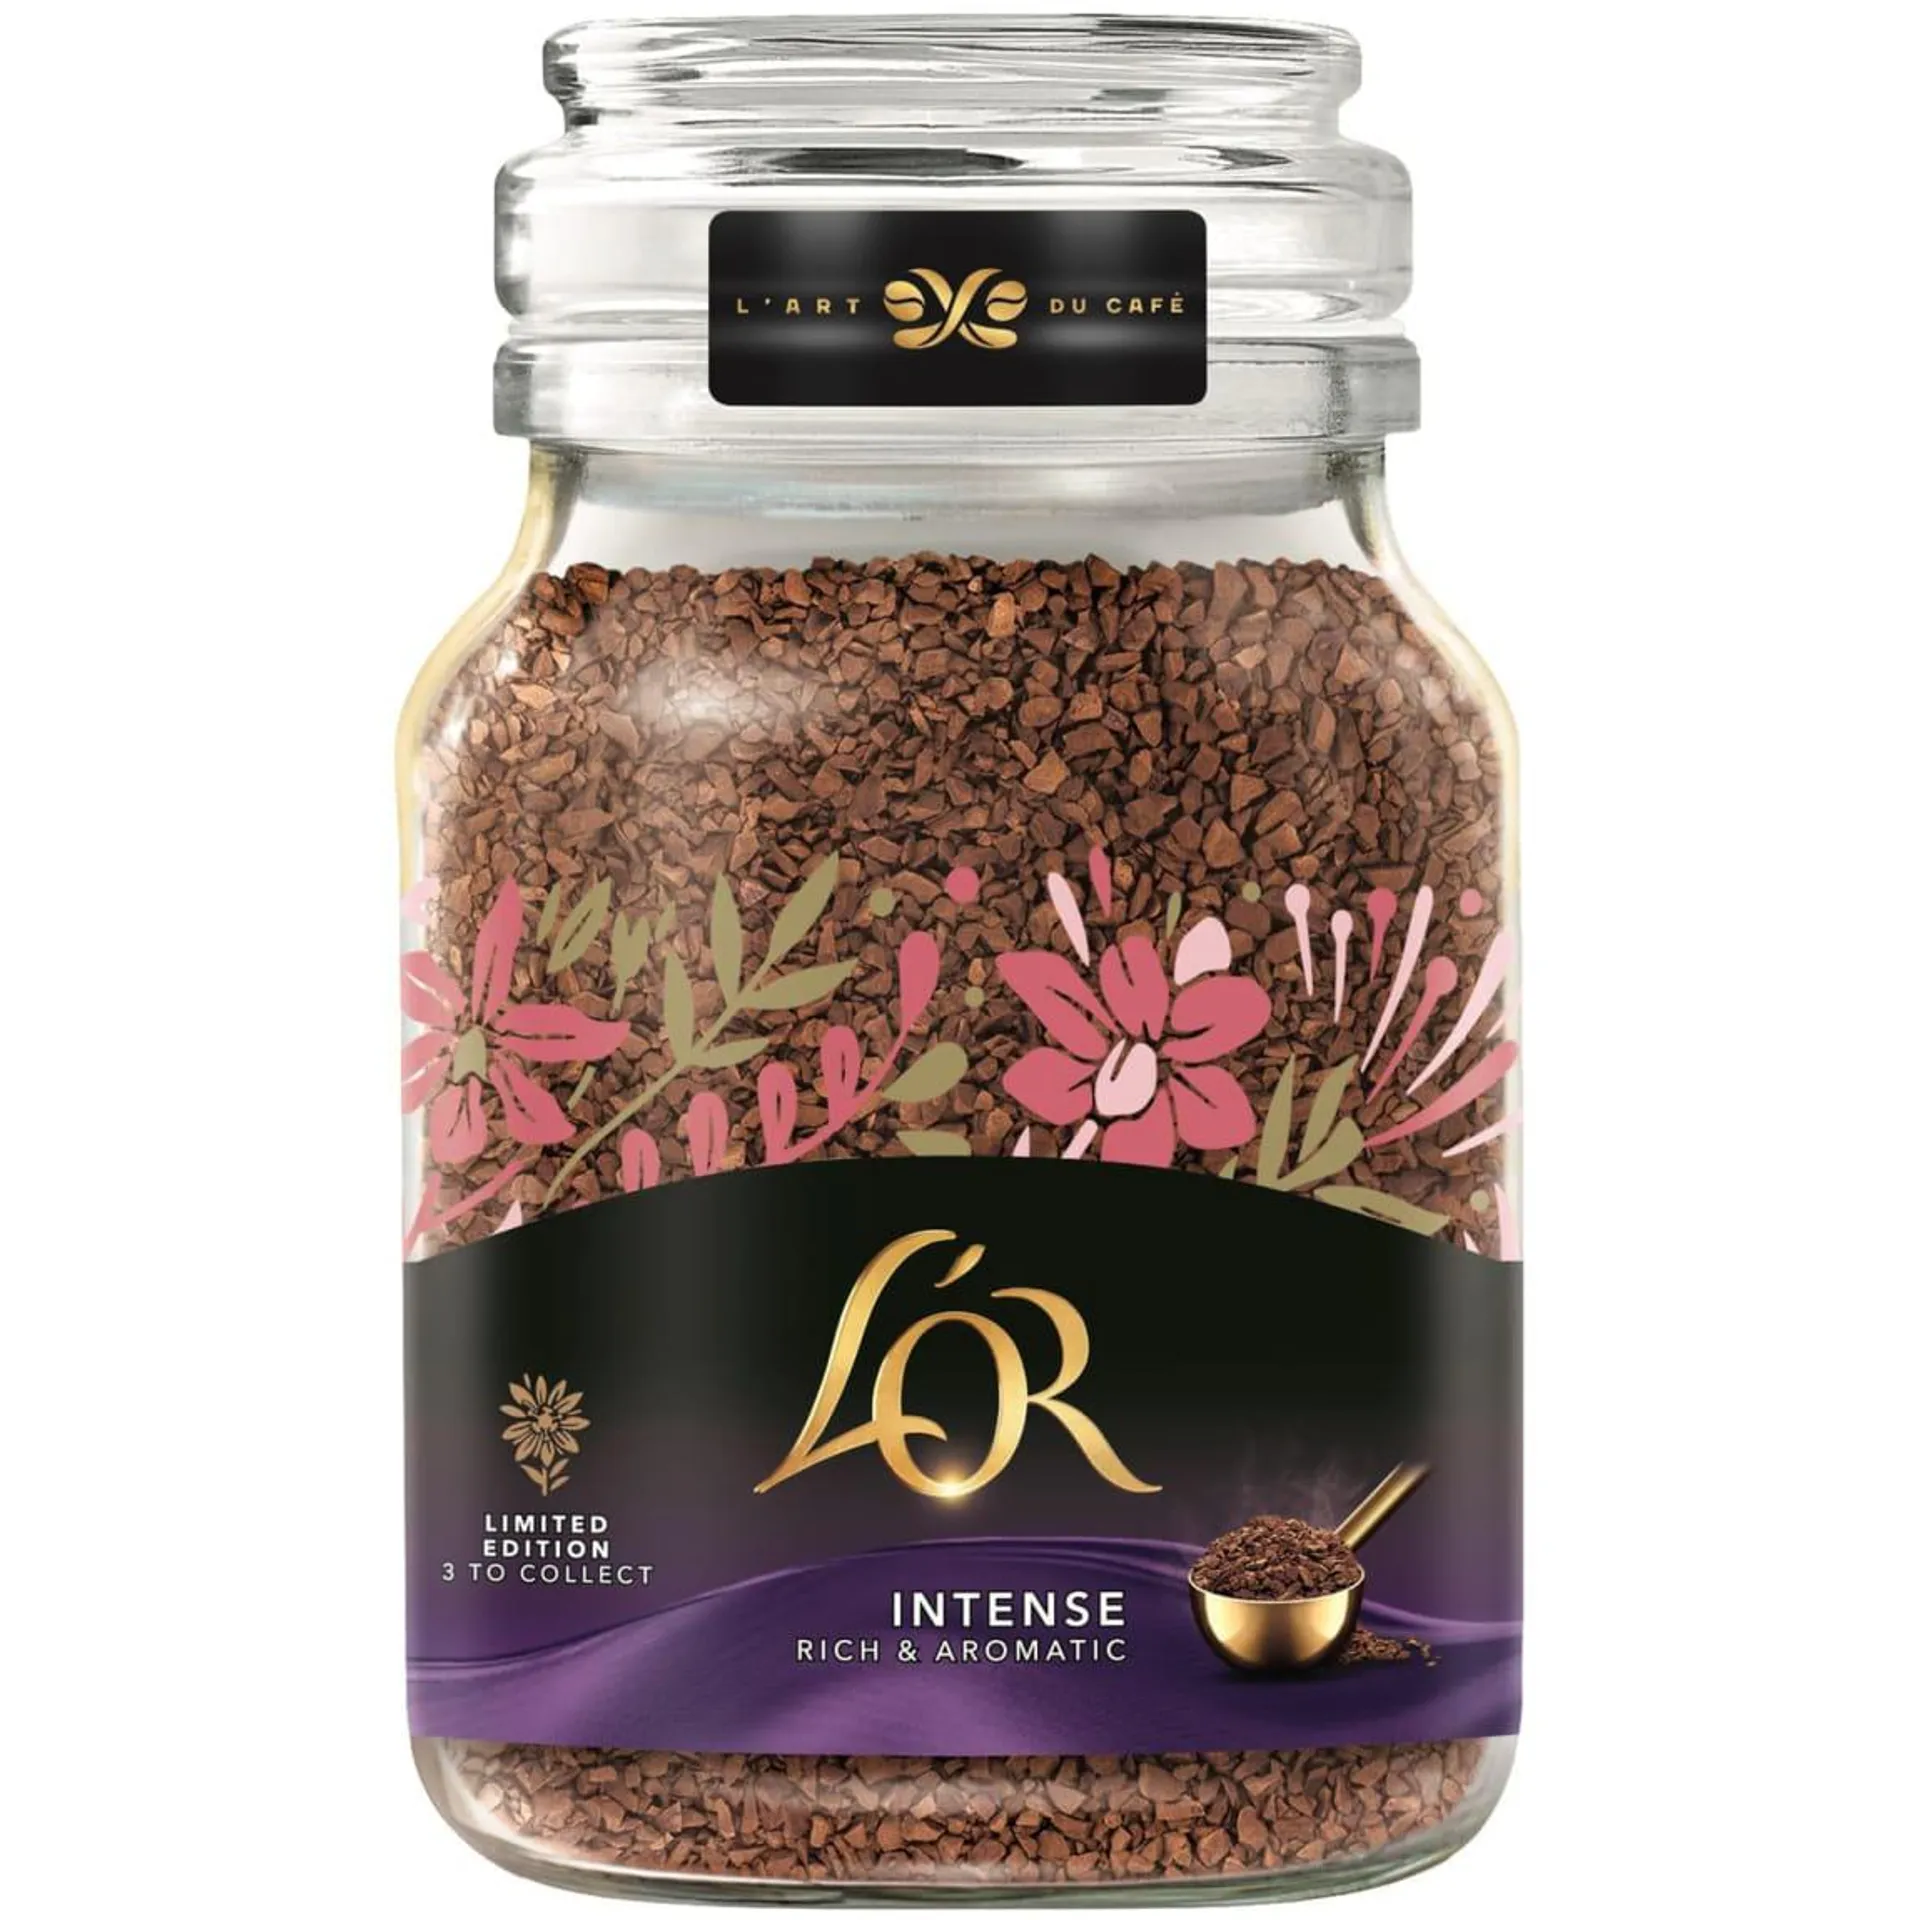 LOR Intense Instant Coffee 150g